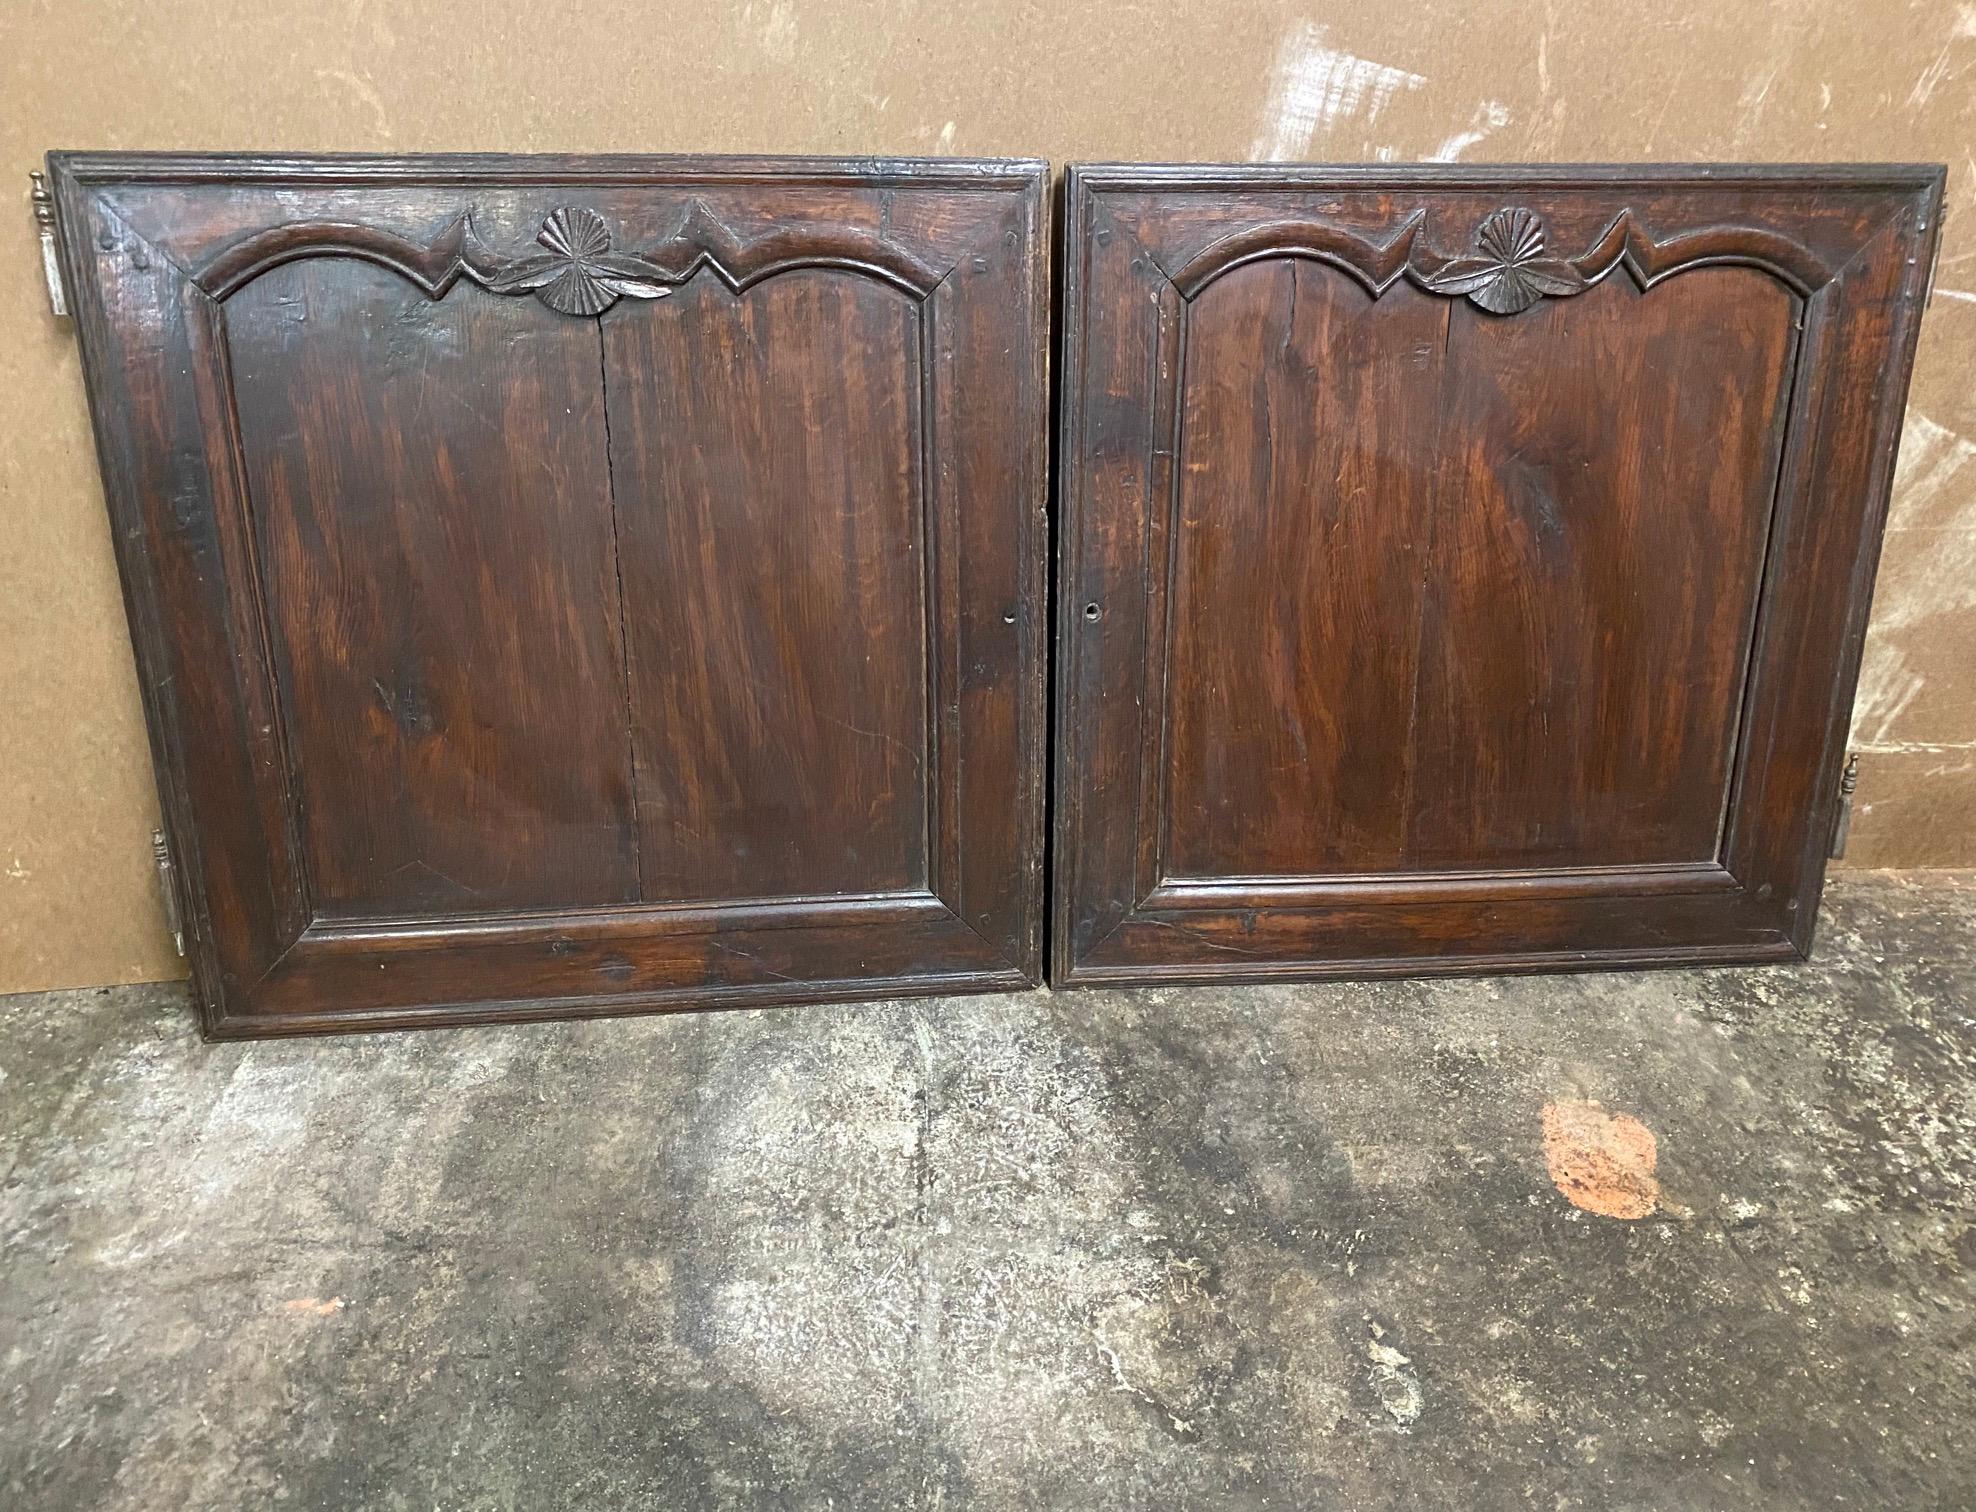 Great pair of Louis XV provincial style doors perfect for a rectangular a base, a custom vanity or built-in cabinet. A great example of carpentry with carved shell design that will add traditional charm to any room. Dimensions are for a single